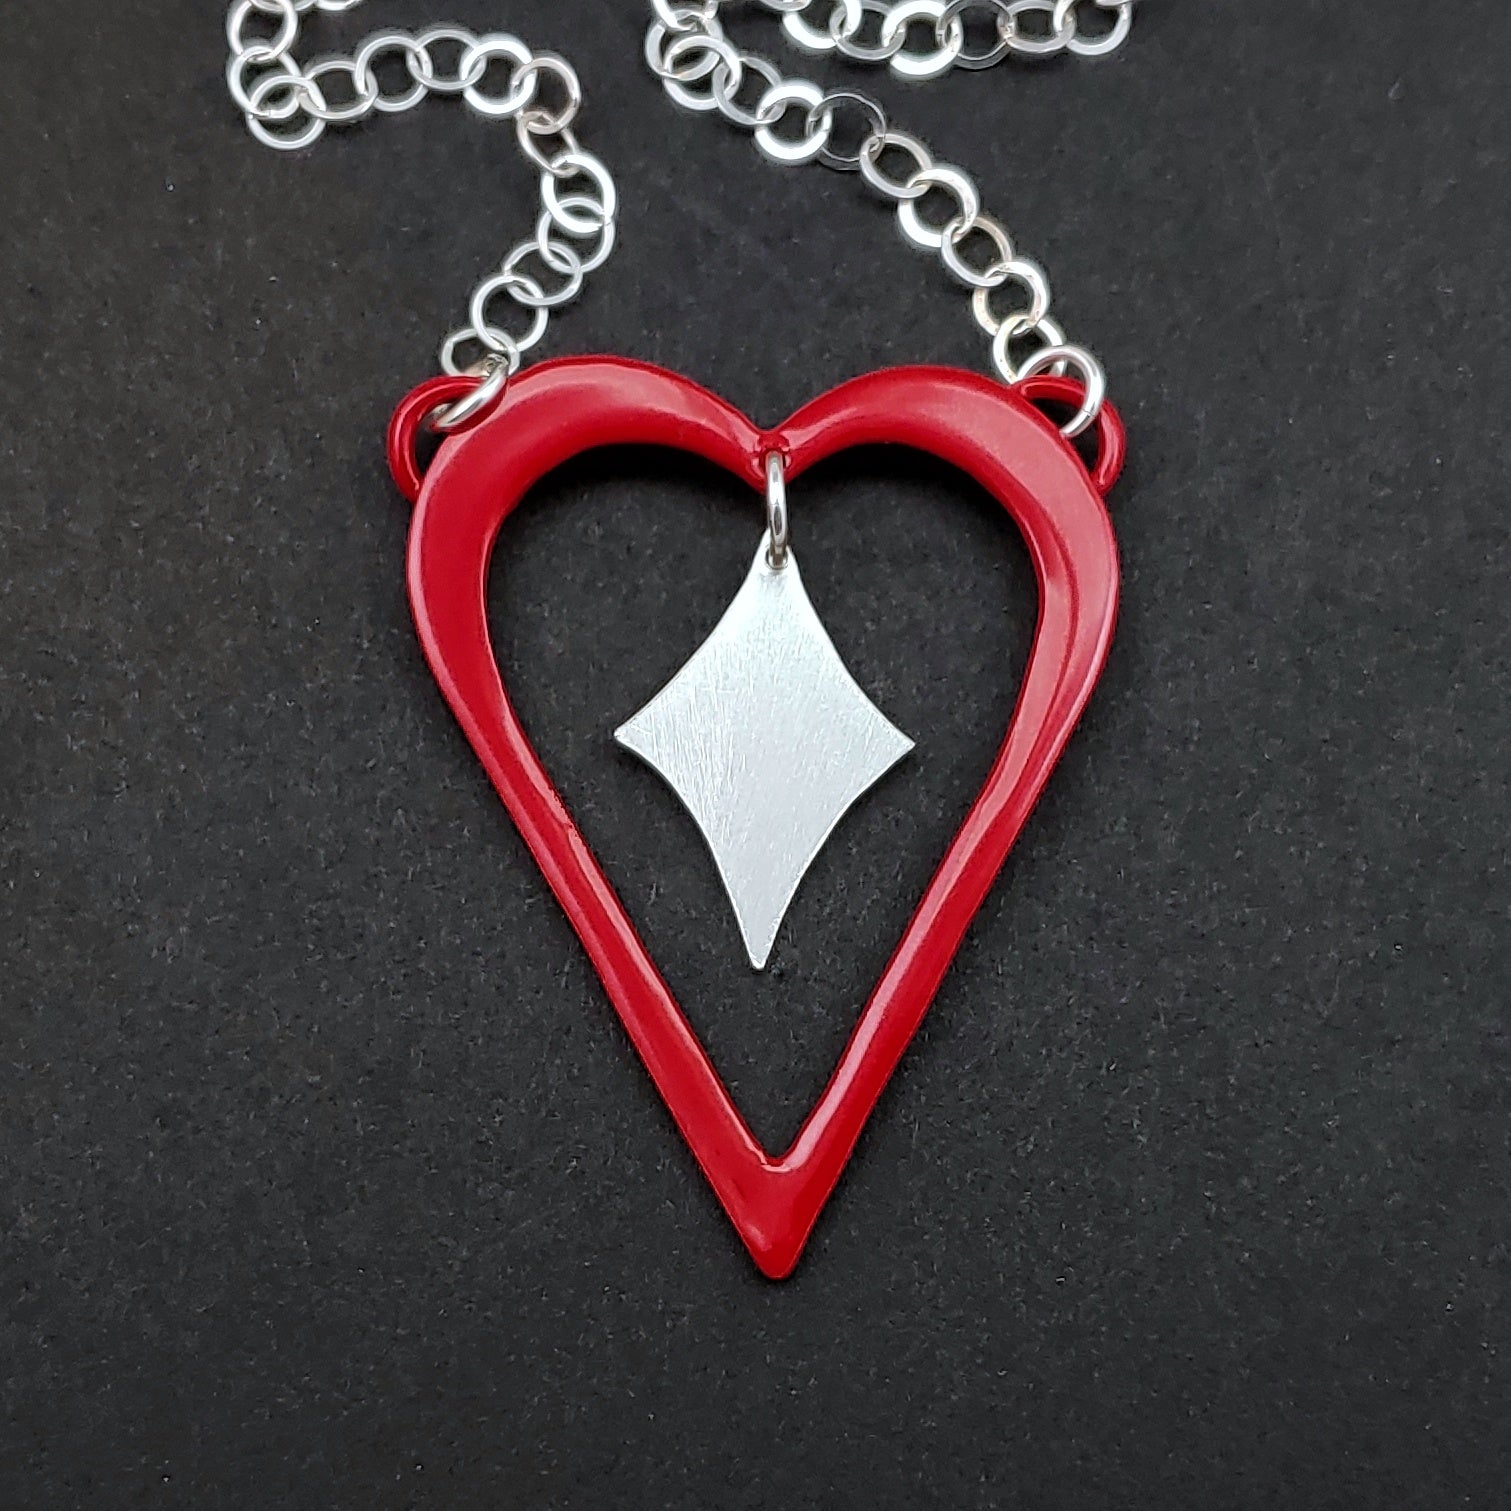 Red powdercoated heart necklace with silver heart